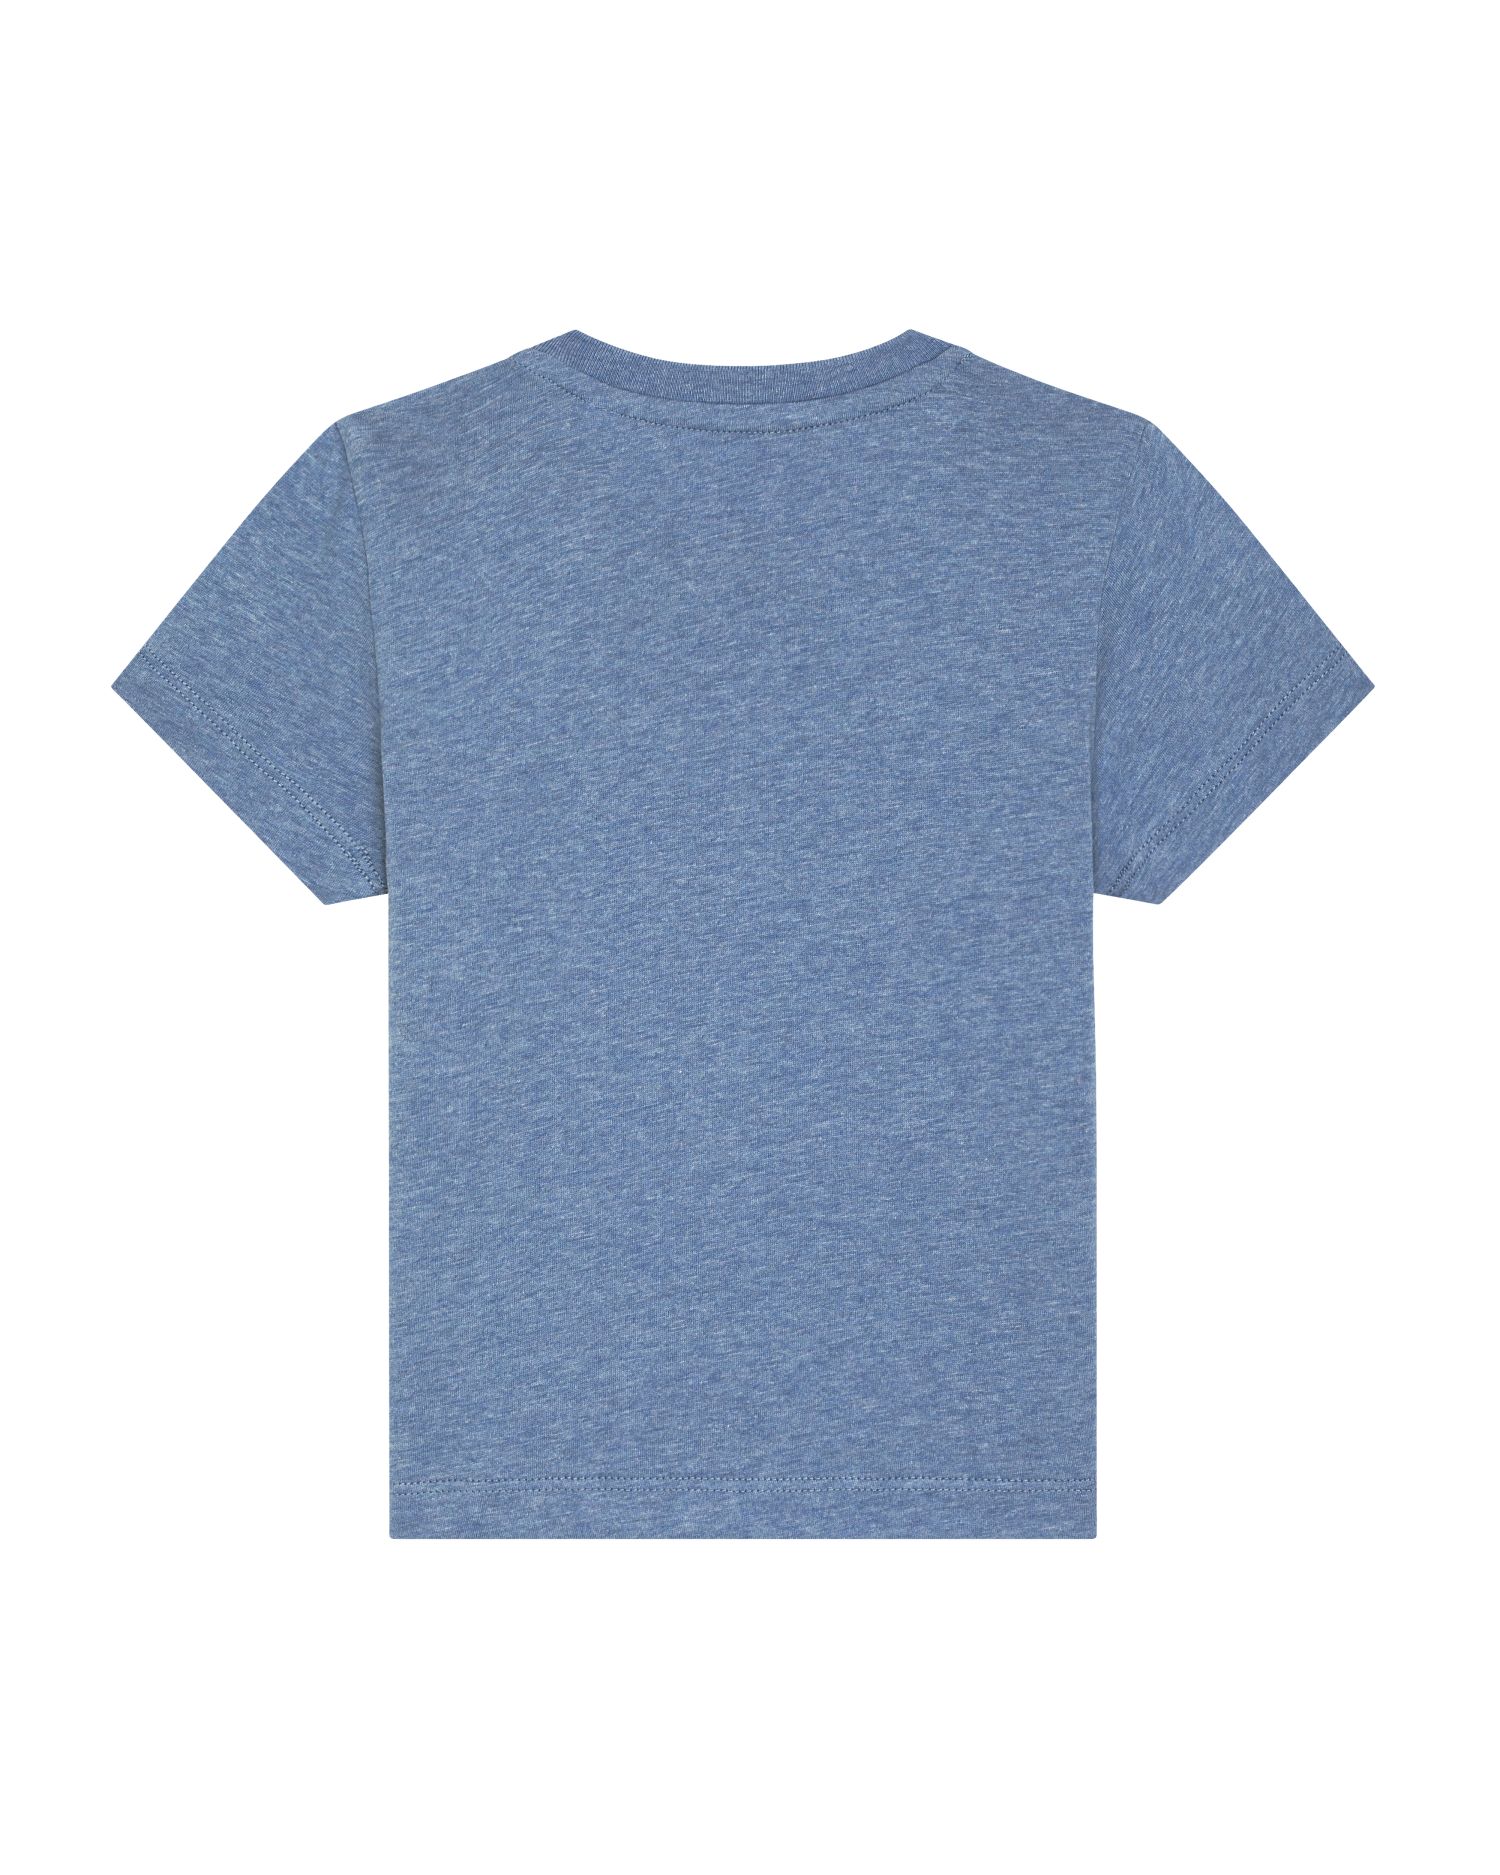 T-Shirt Baby Creator in Farbe Mid Heather Blue